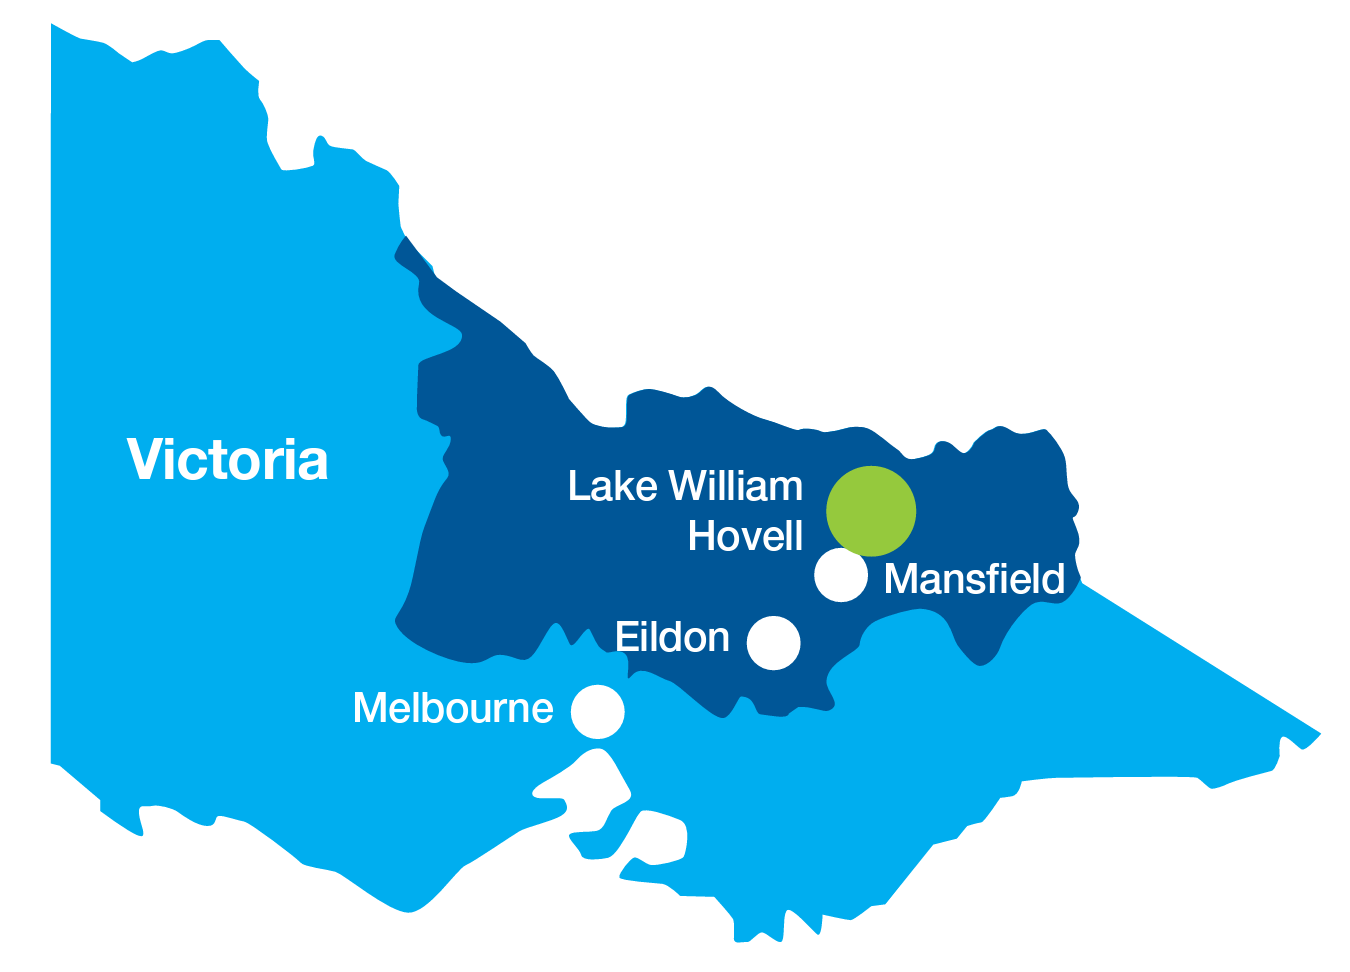 Lake William Hovell location in map of Victoria